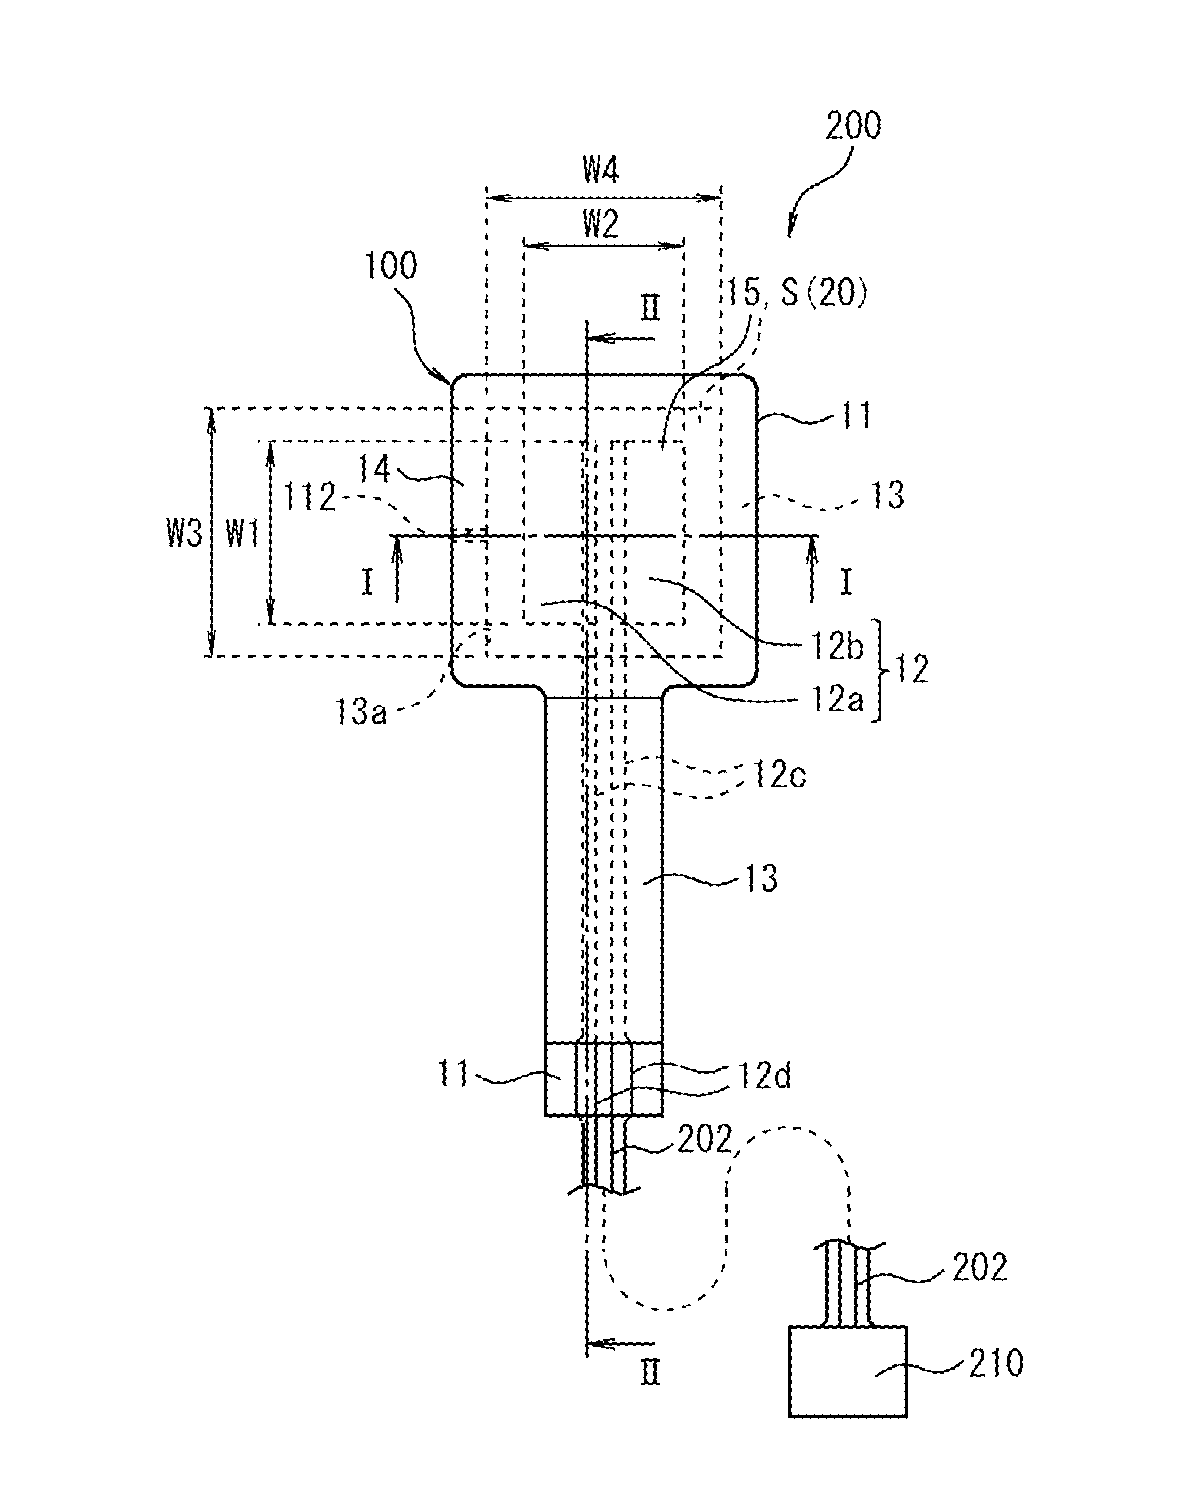 Pressure sensing element having an insulating layer with an increased height from the substrate towards the opening